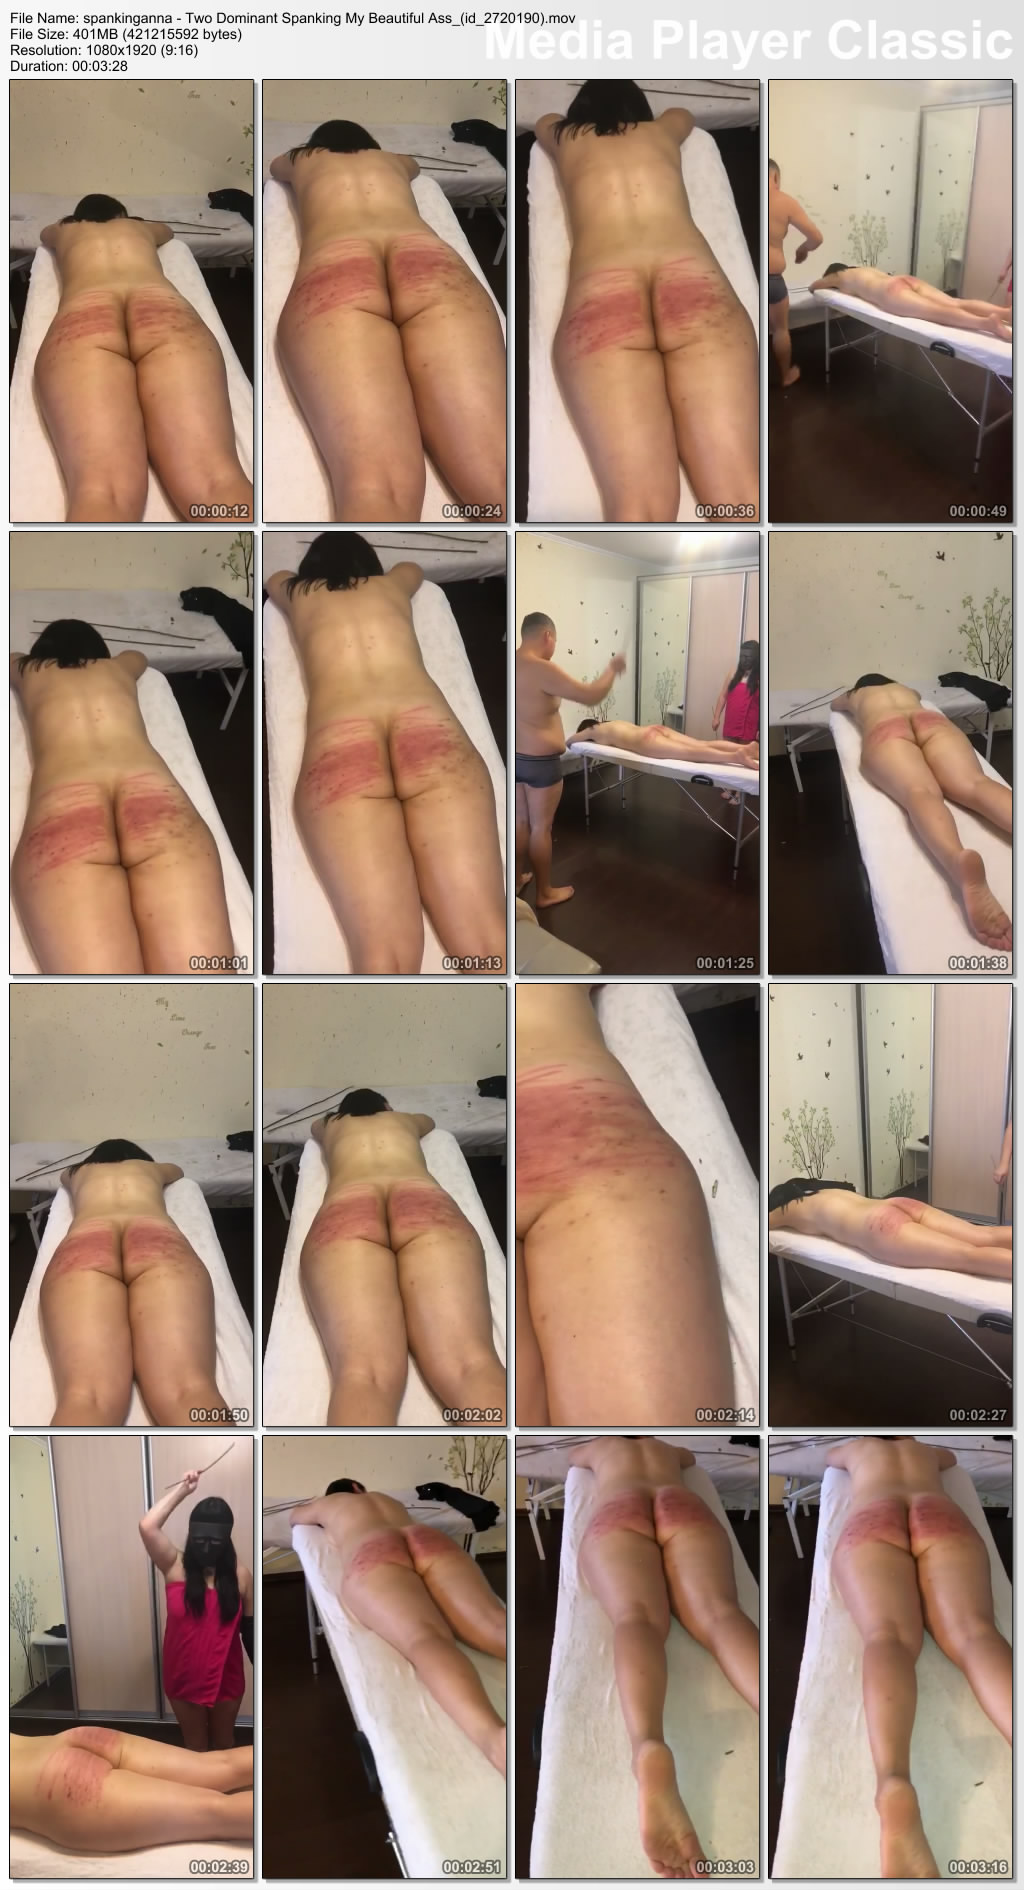 thumbs20210915221404 - spankinganna - MP4/Full HD - Two Dominant Spanking My Beautiful Ass (Exclusive)